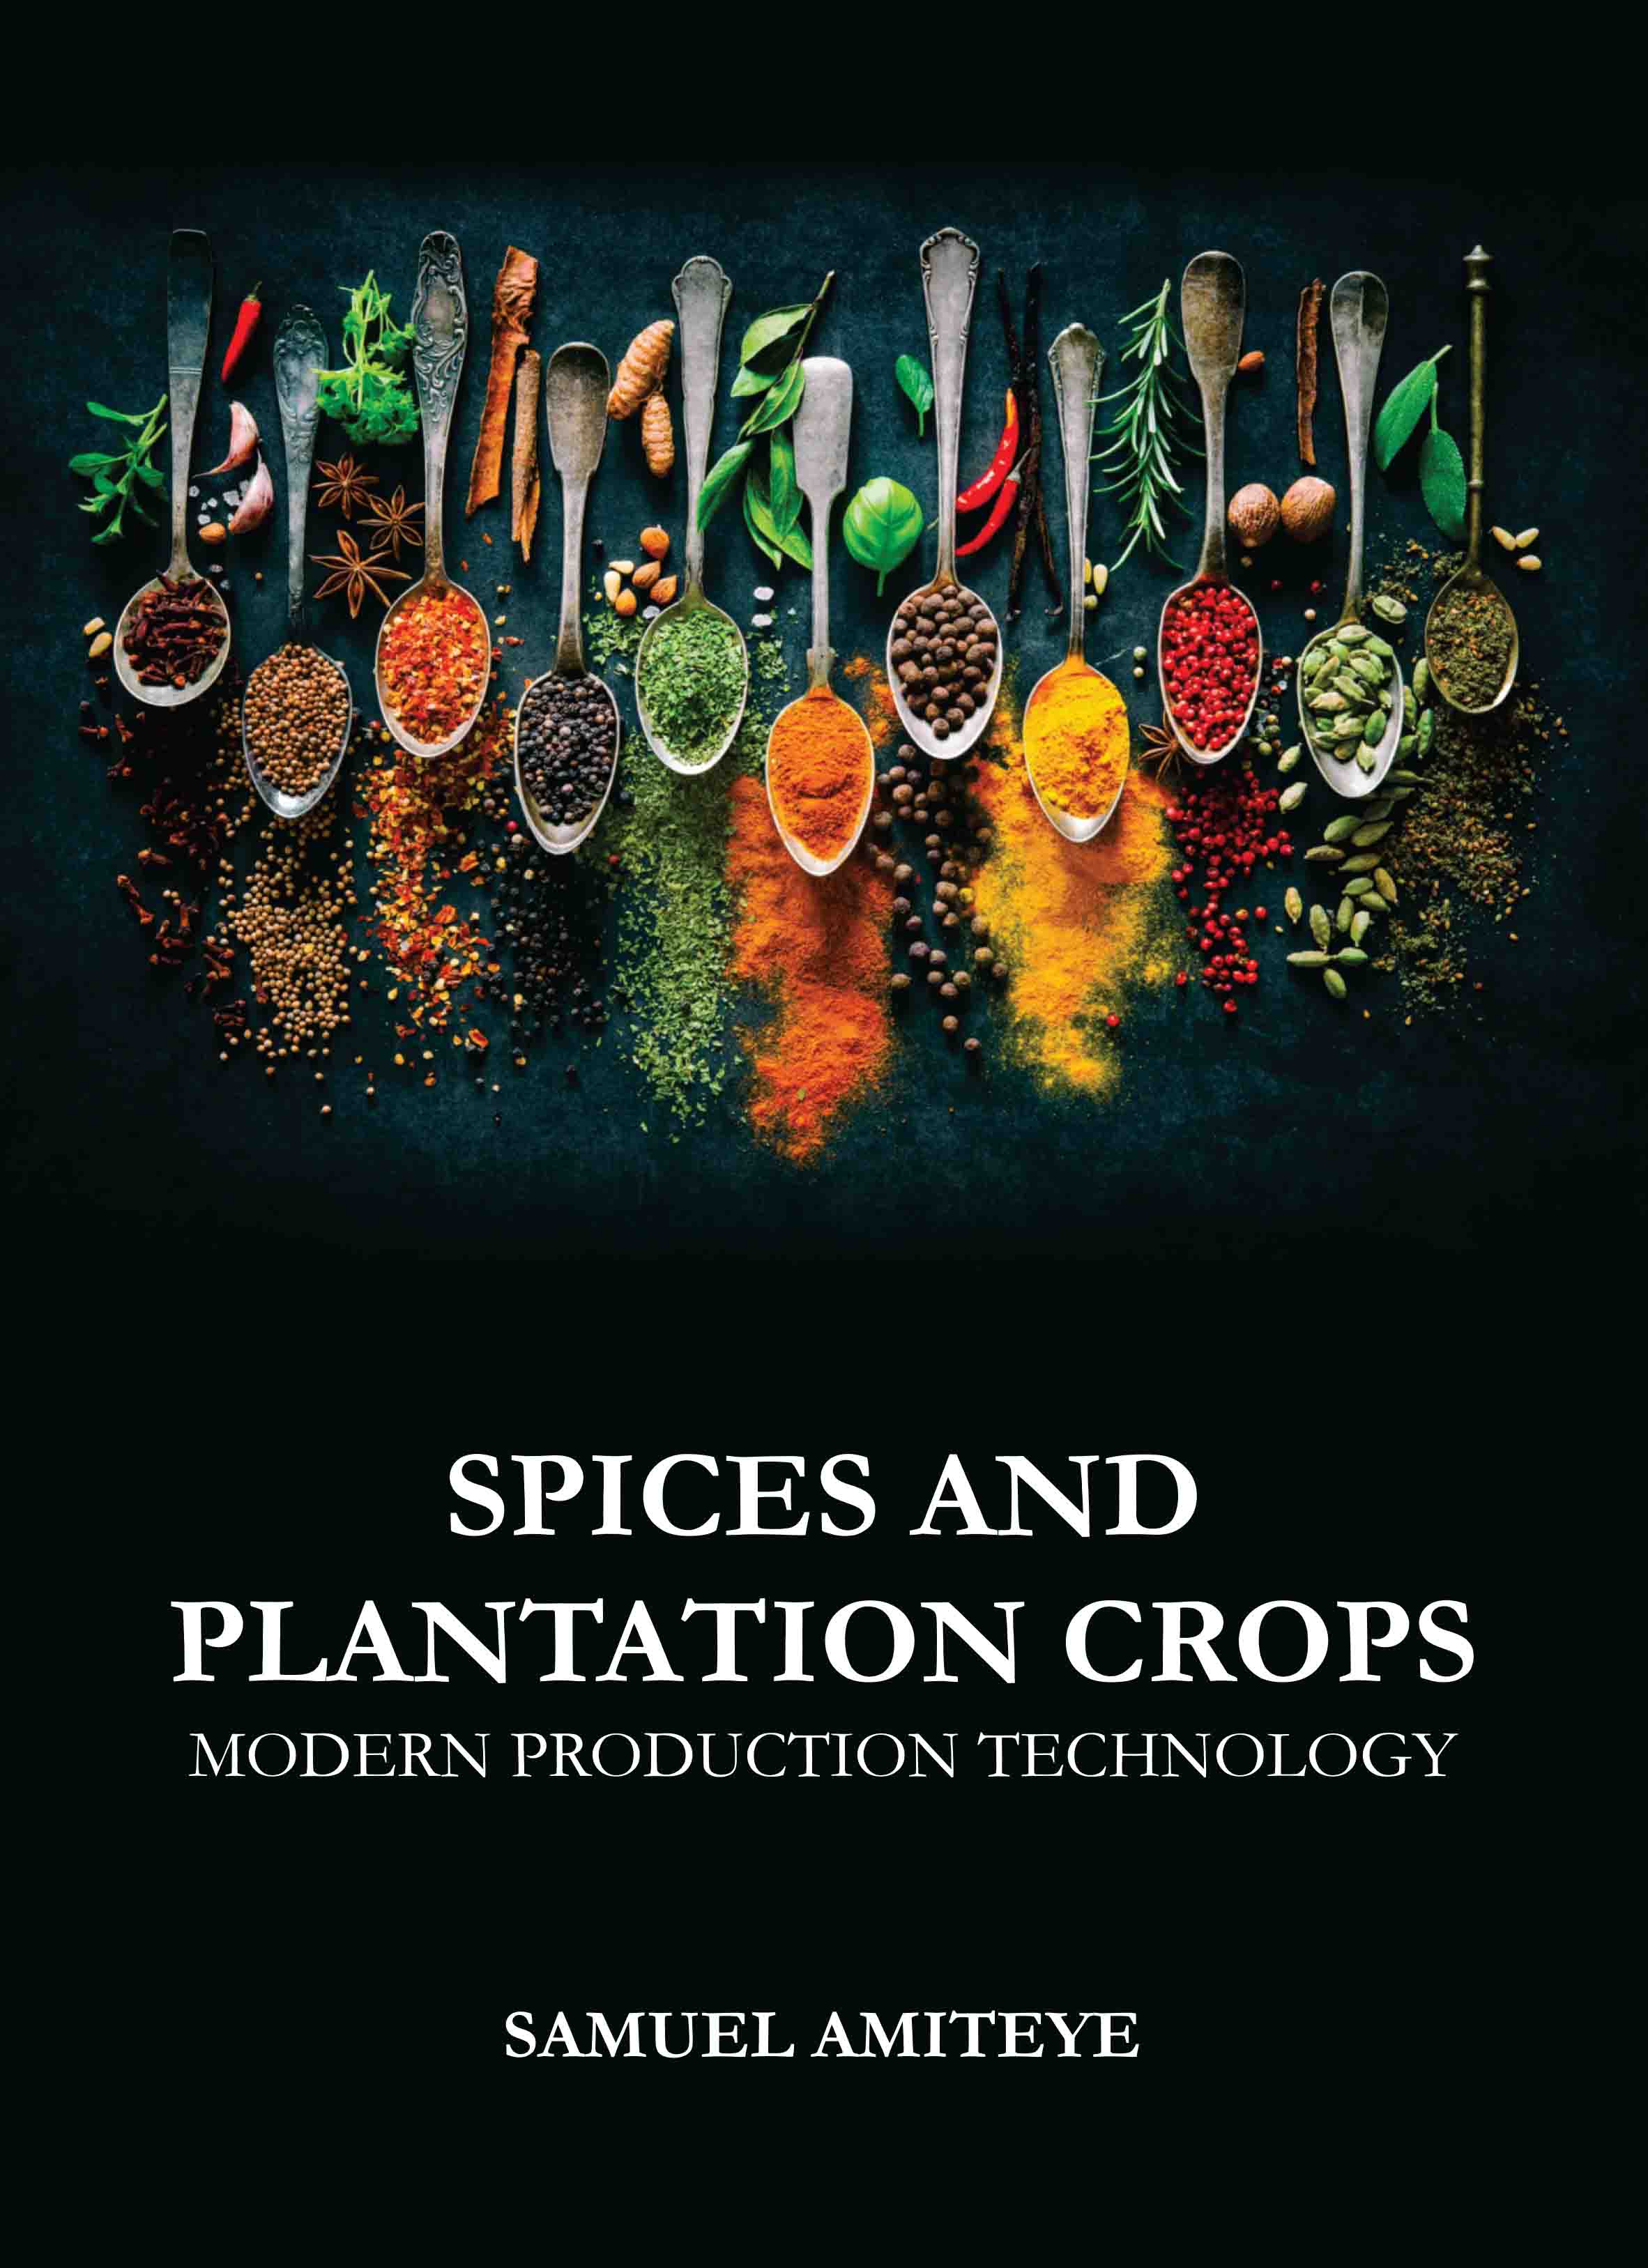 Spices and Plantation Crops: Modern Production Technology